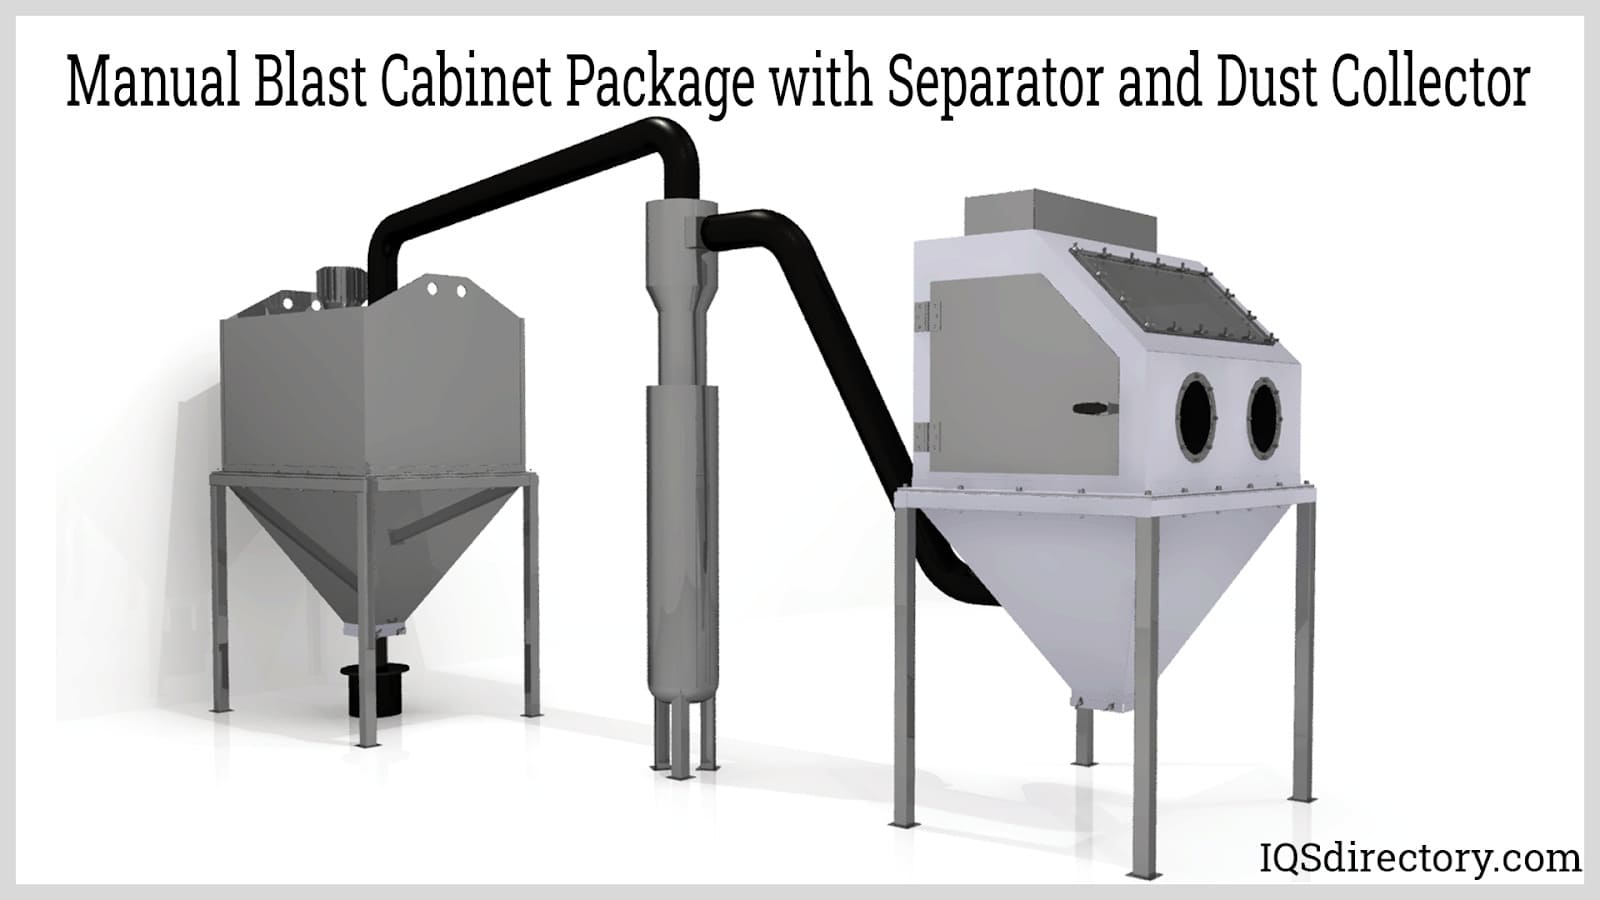 Manual Blast Cabinet Package with Separator and Dust Collector